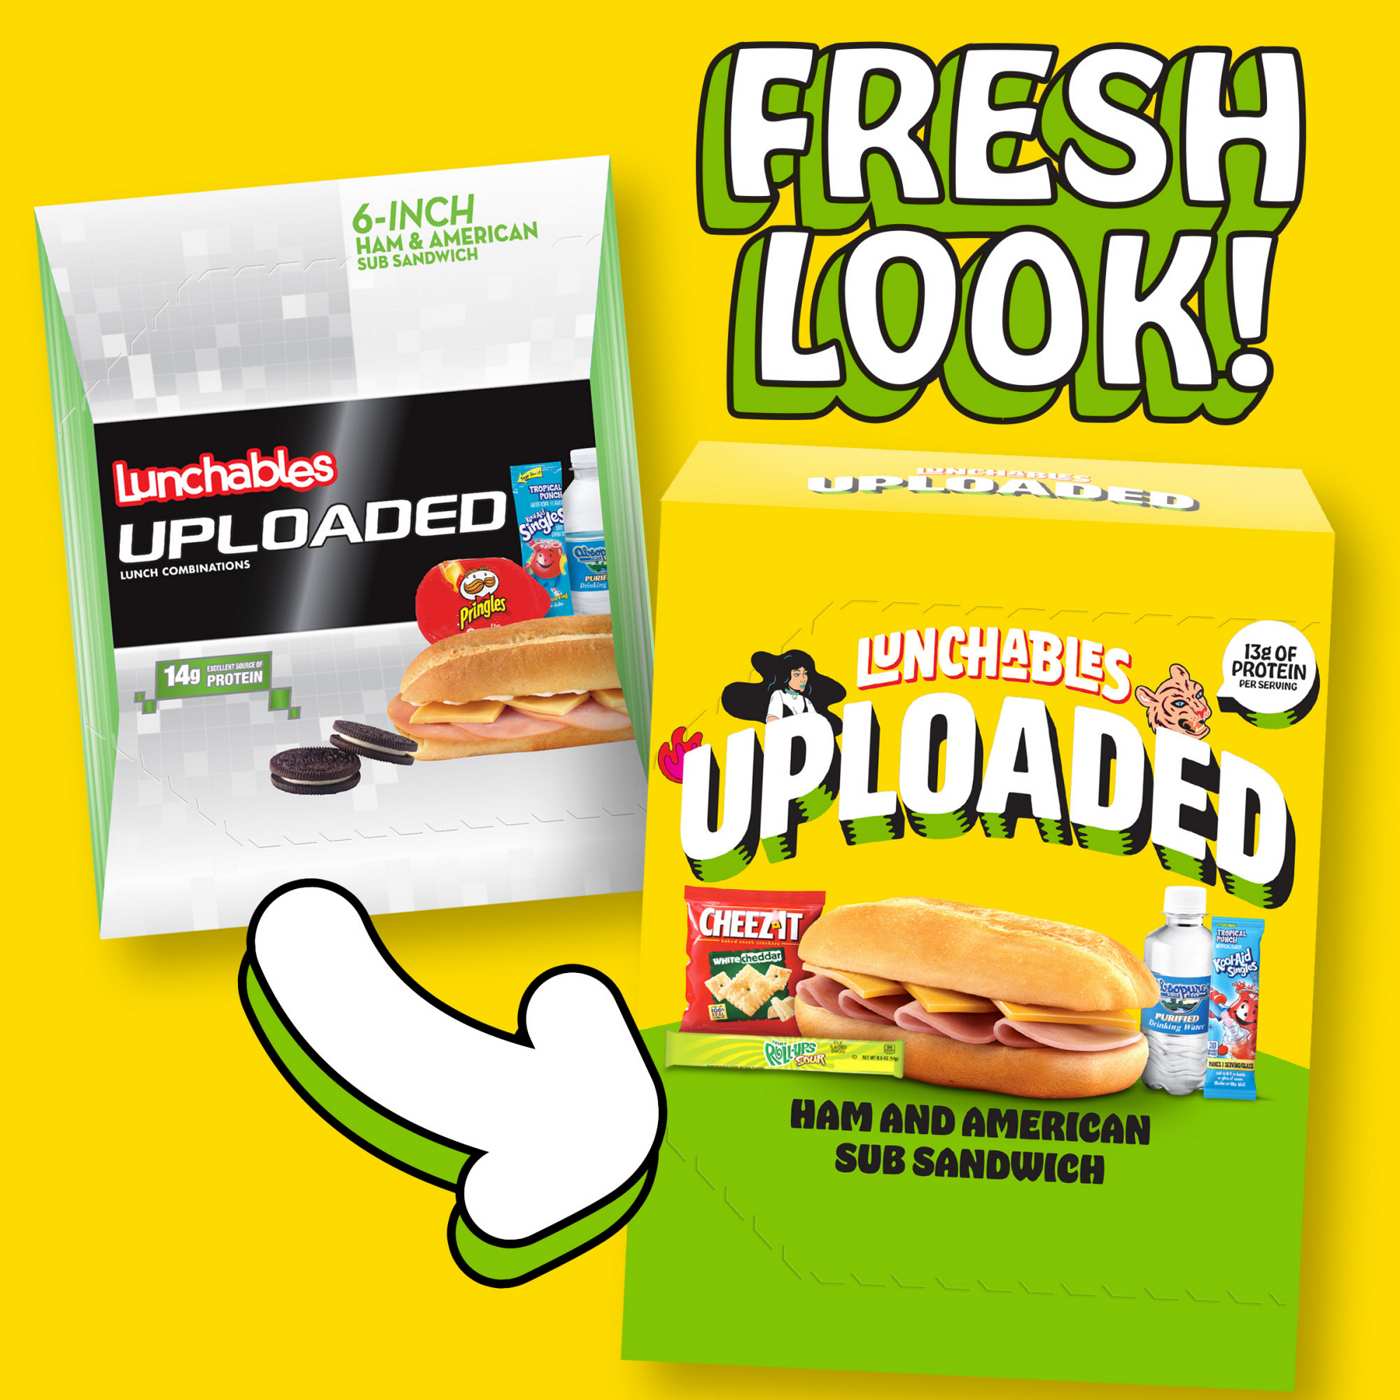 Lunchables Uploaded Meal Kit - Ham & American Sub Sandwich; image 4 of 4